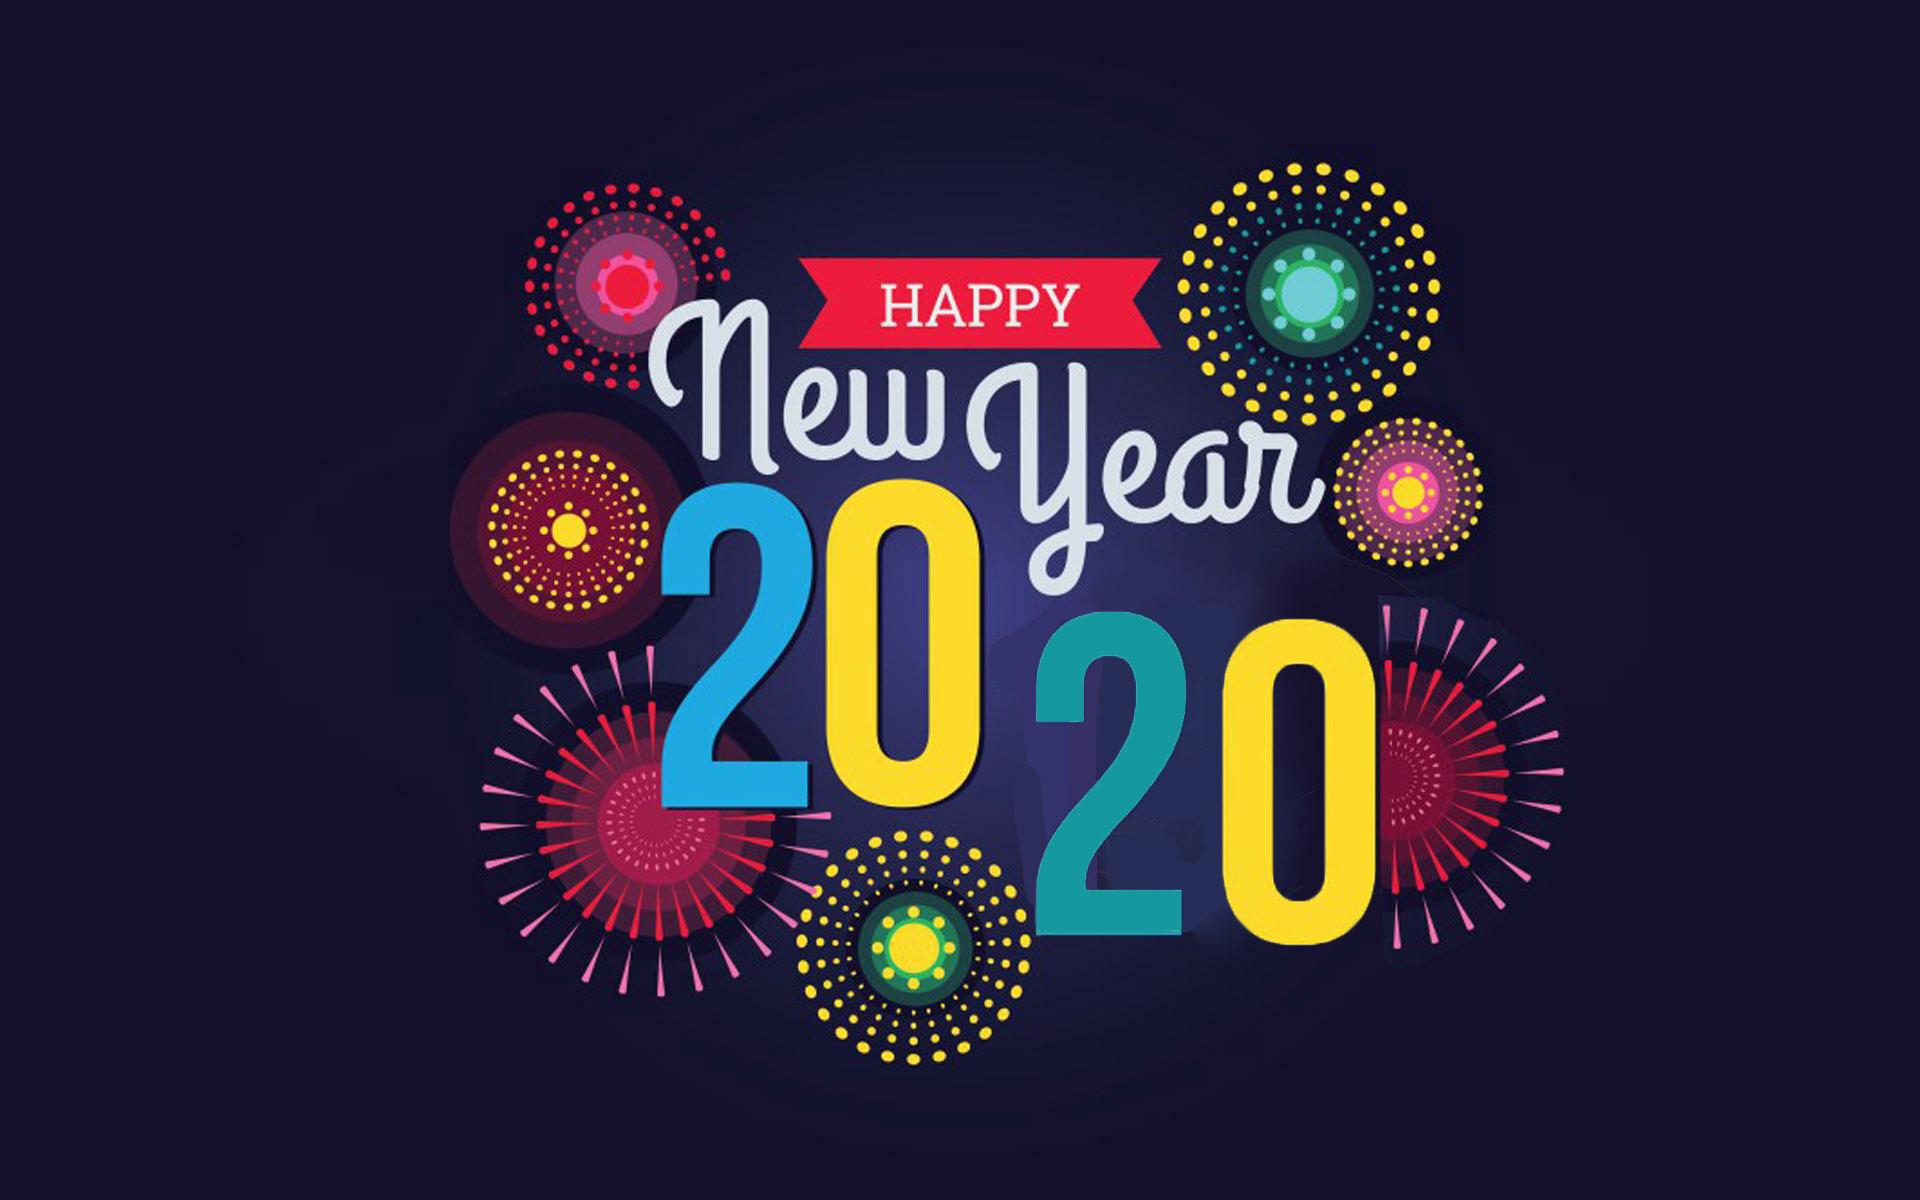 Happy New Year Hd 2020 Wallpapers Wallpaper Cave 7366